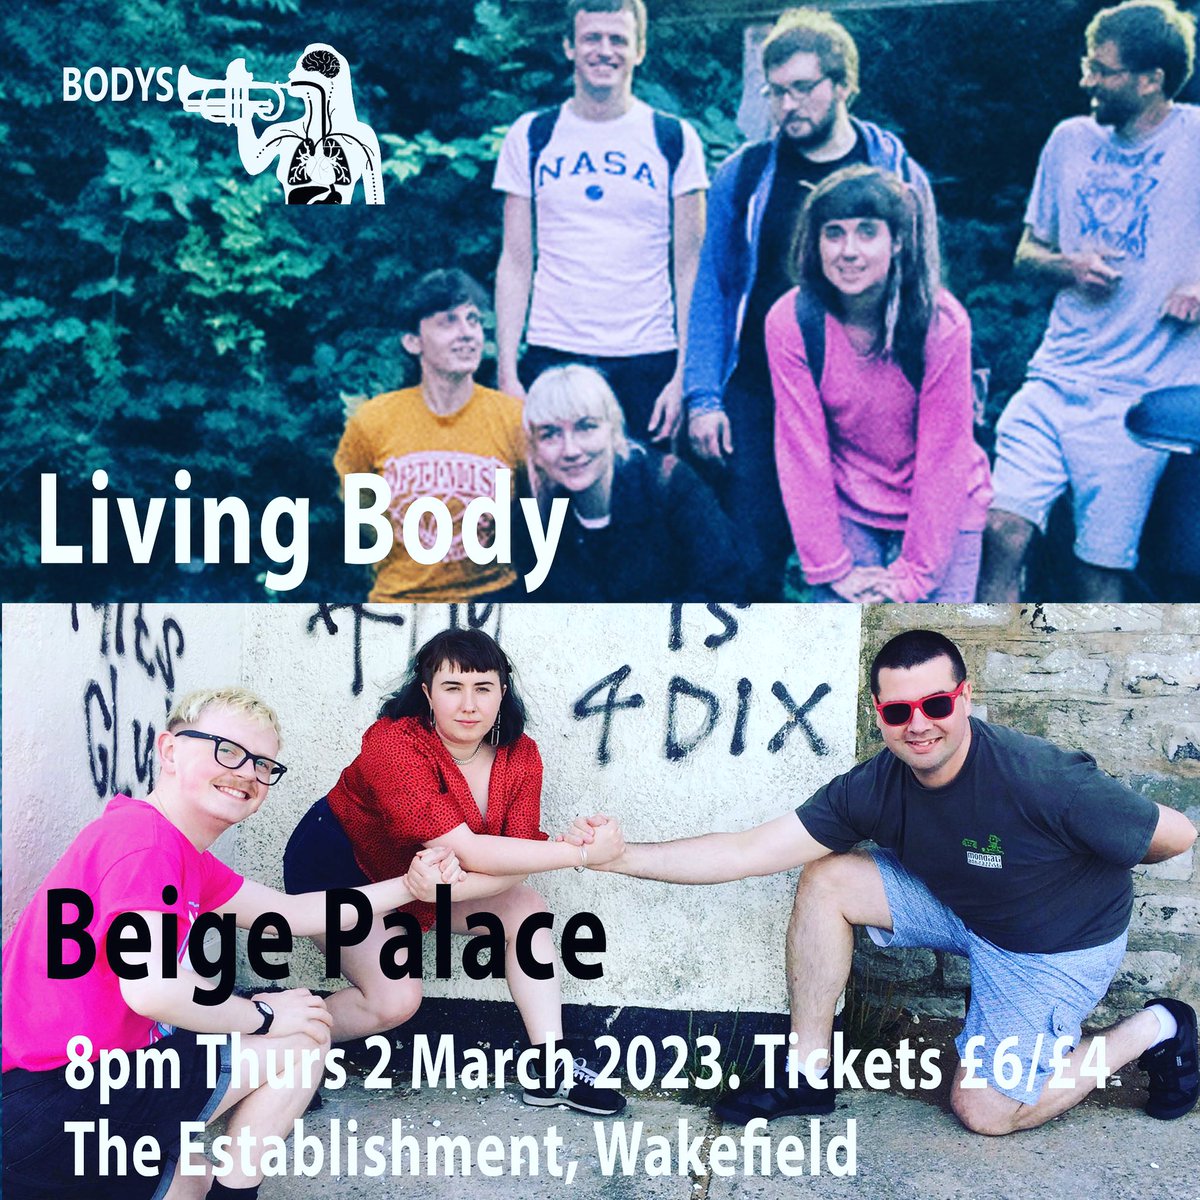 Tonight! Our next lovely Bodys gig at @EstablishmentWF on Westgate, Wakefield (dead near the train station). 8pm doors 8.30pm beige palace 9.15pm @livingbodylife 10pm bed-time or socialise-time Tickets £6/4 on the door or in bio link. See you in a bit 😍